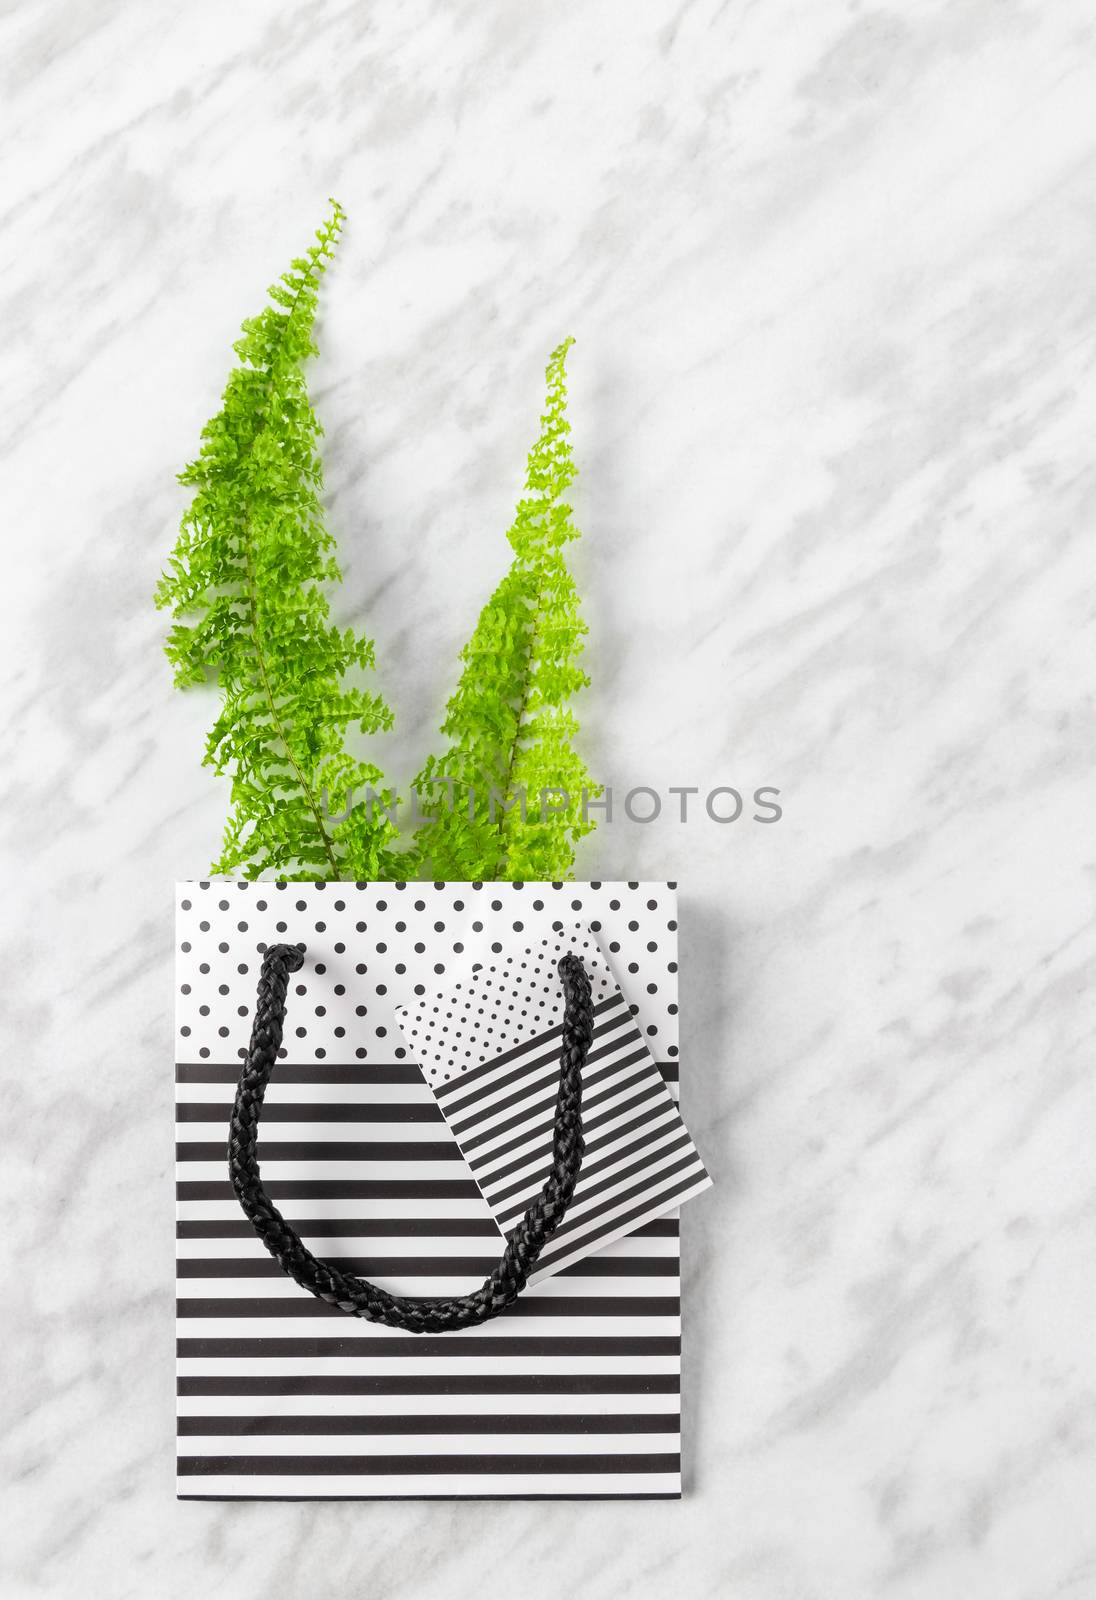 Green fern branches in a black and white striped gift bag, on marble background.